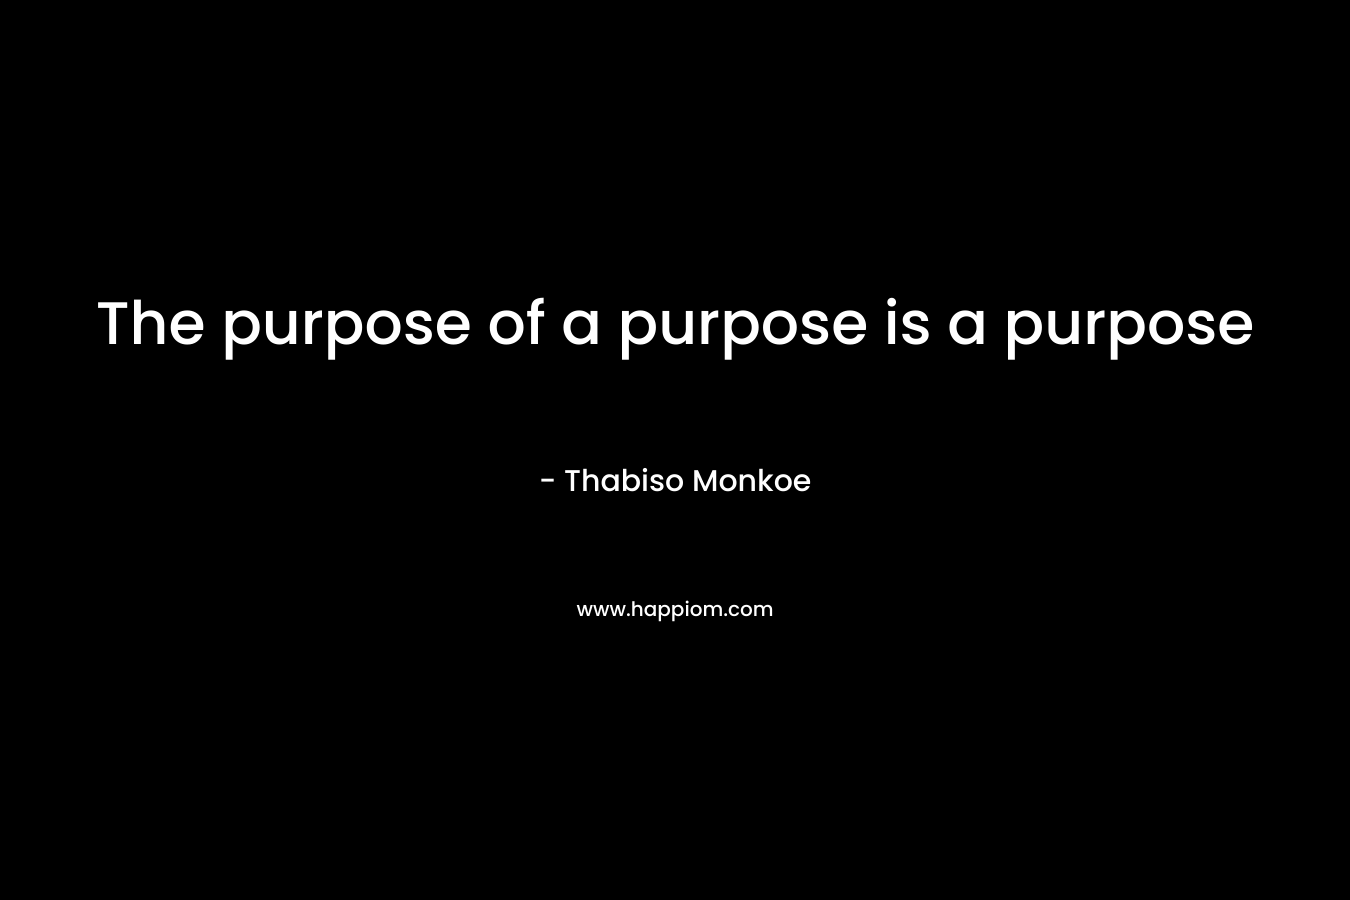 The purpose of a purpose is a purpose